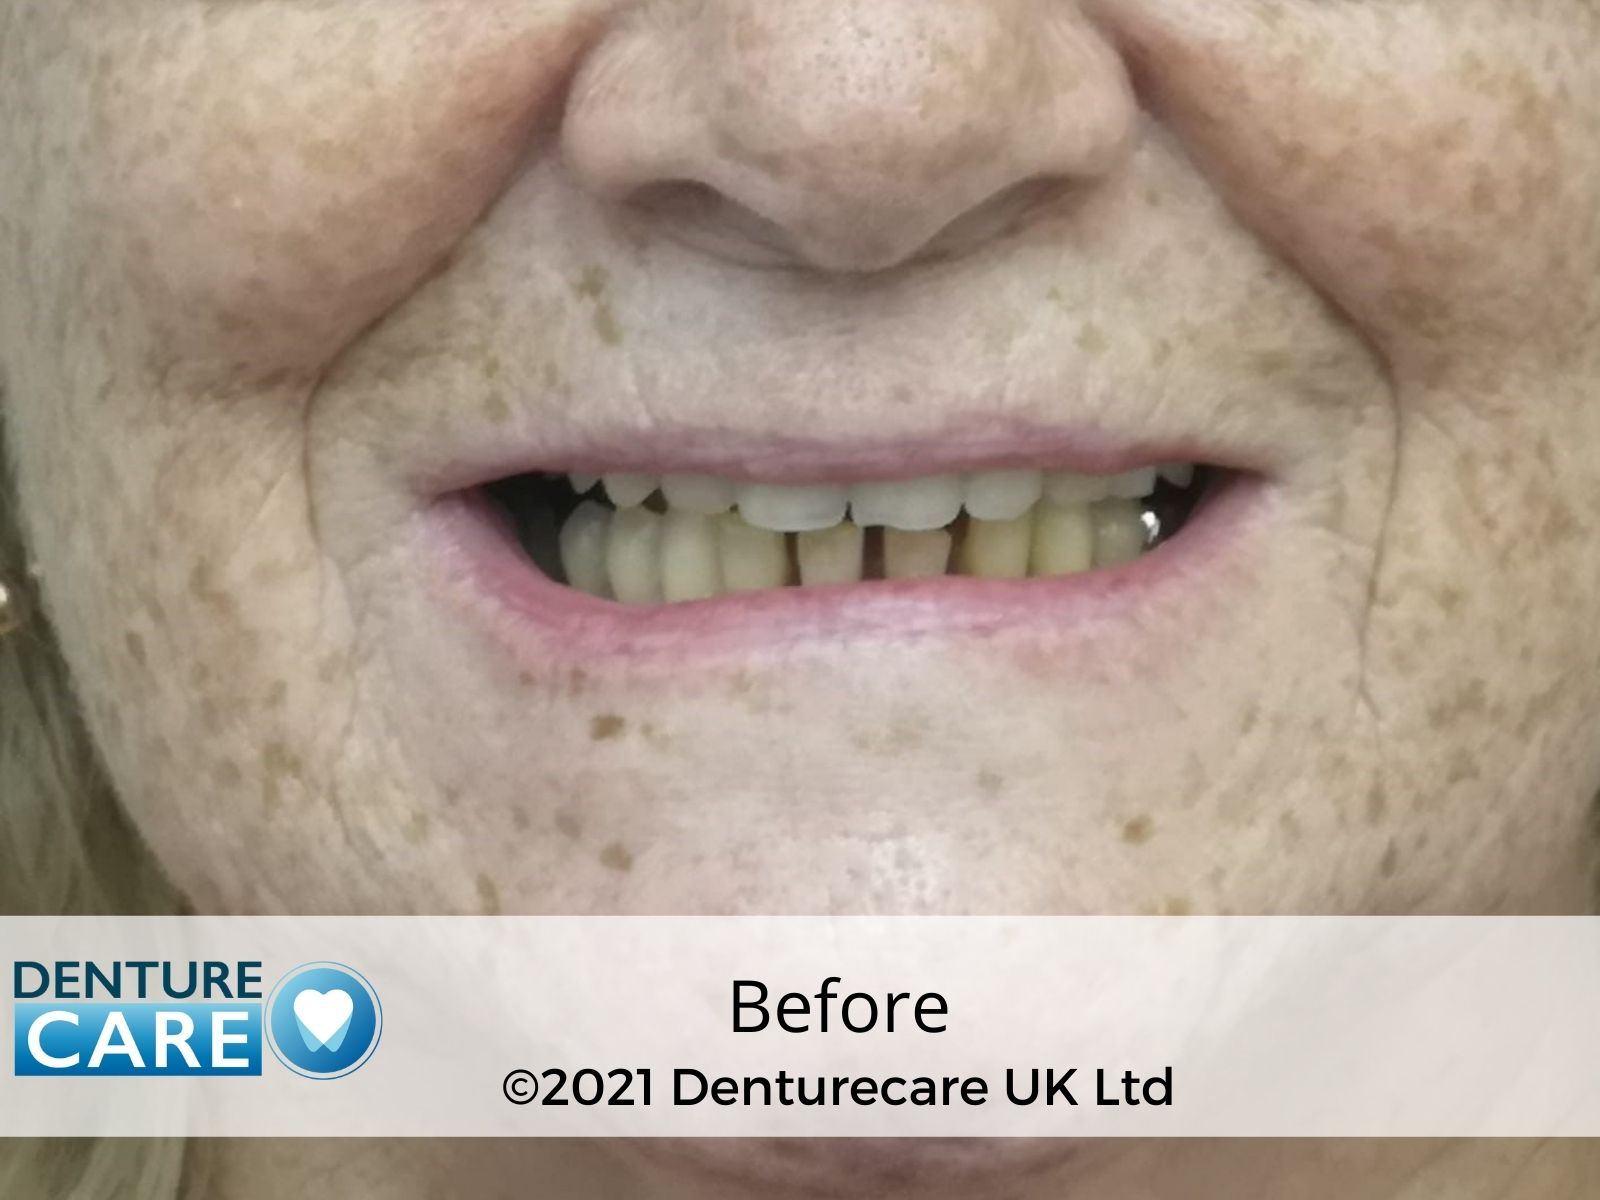 Before and after dentures photo